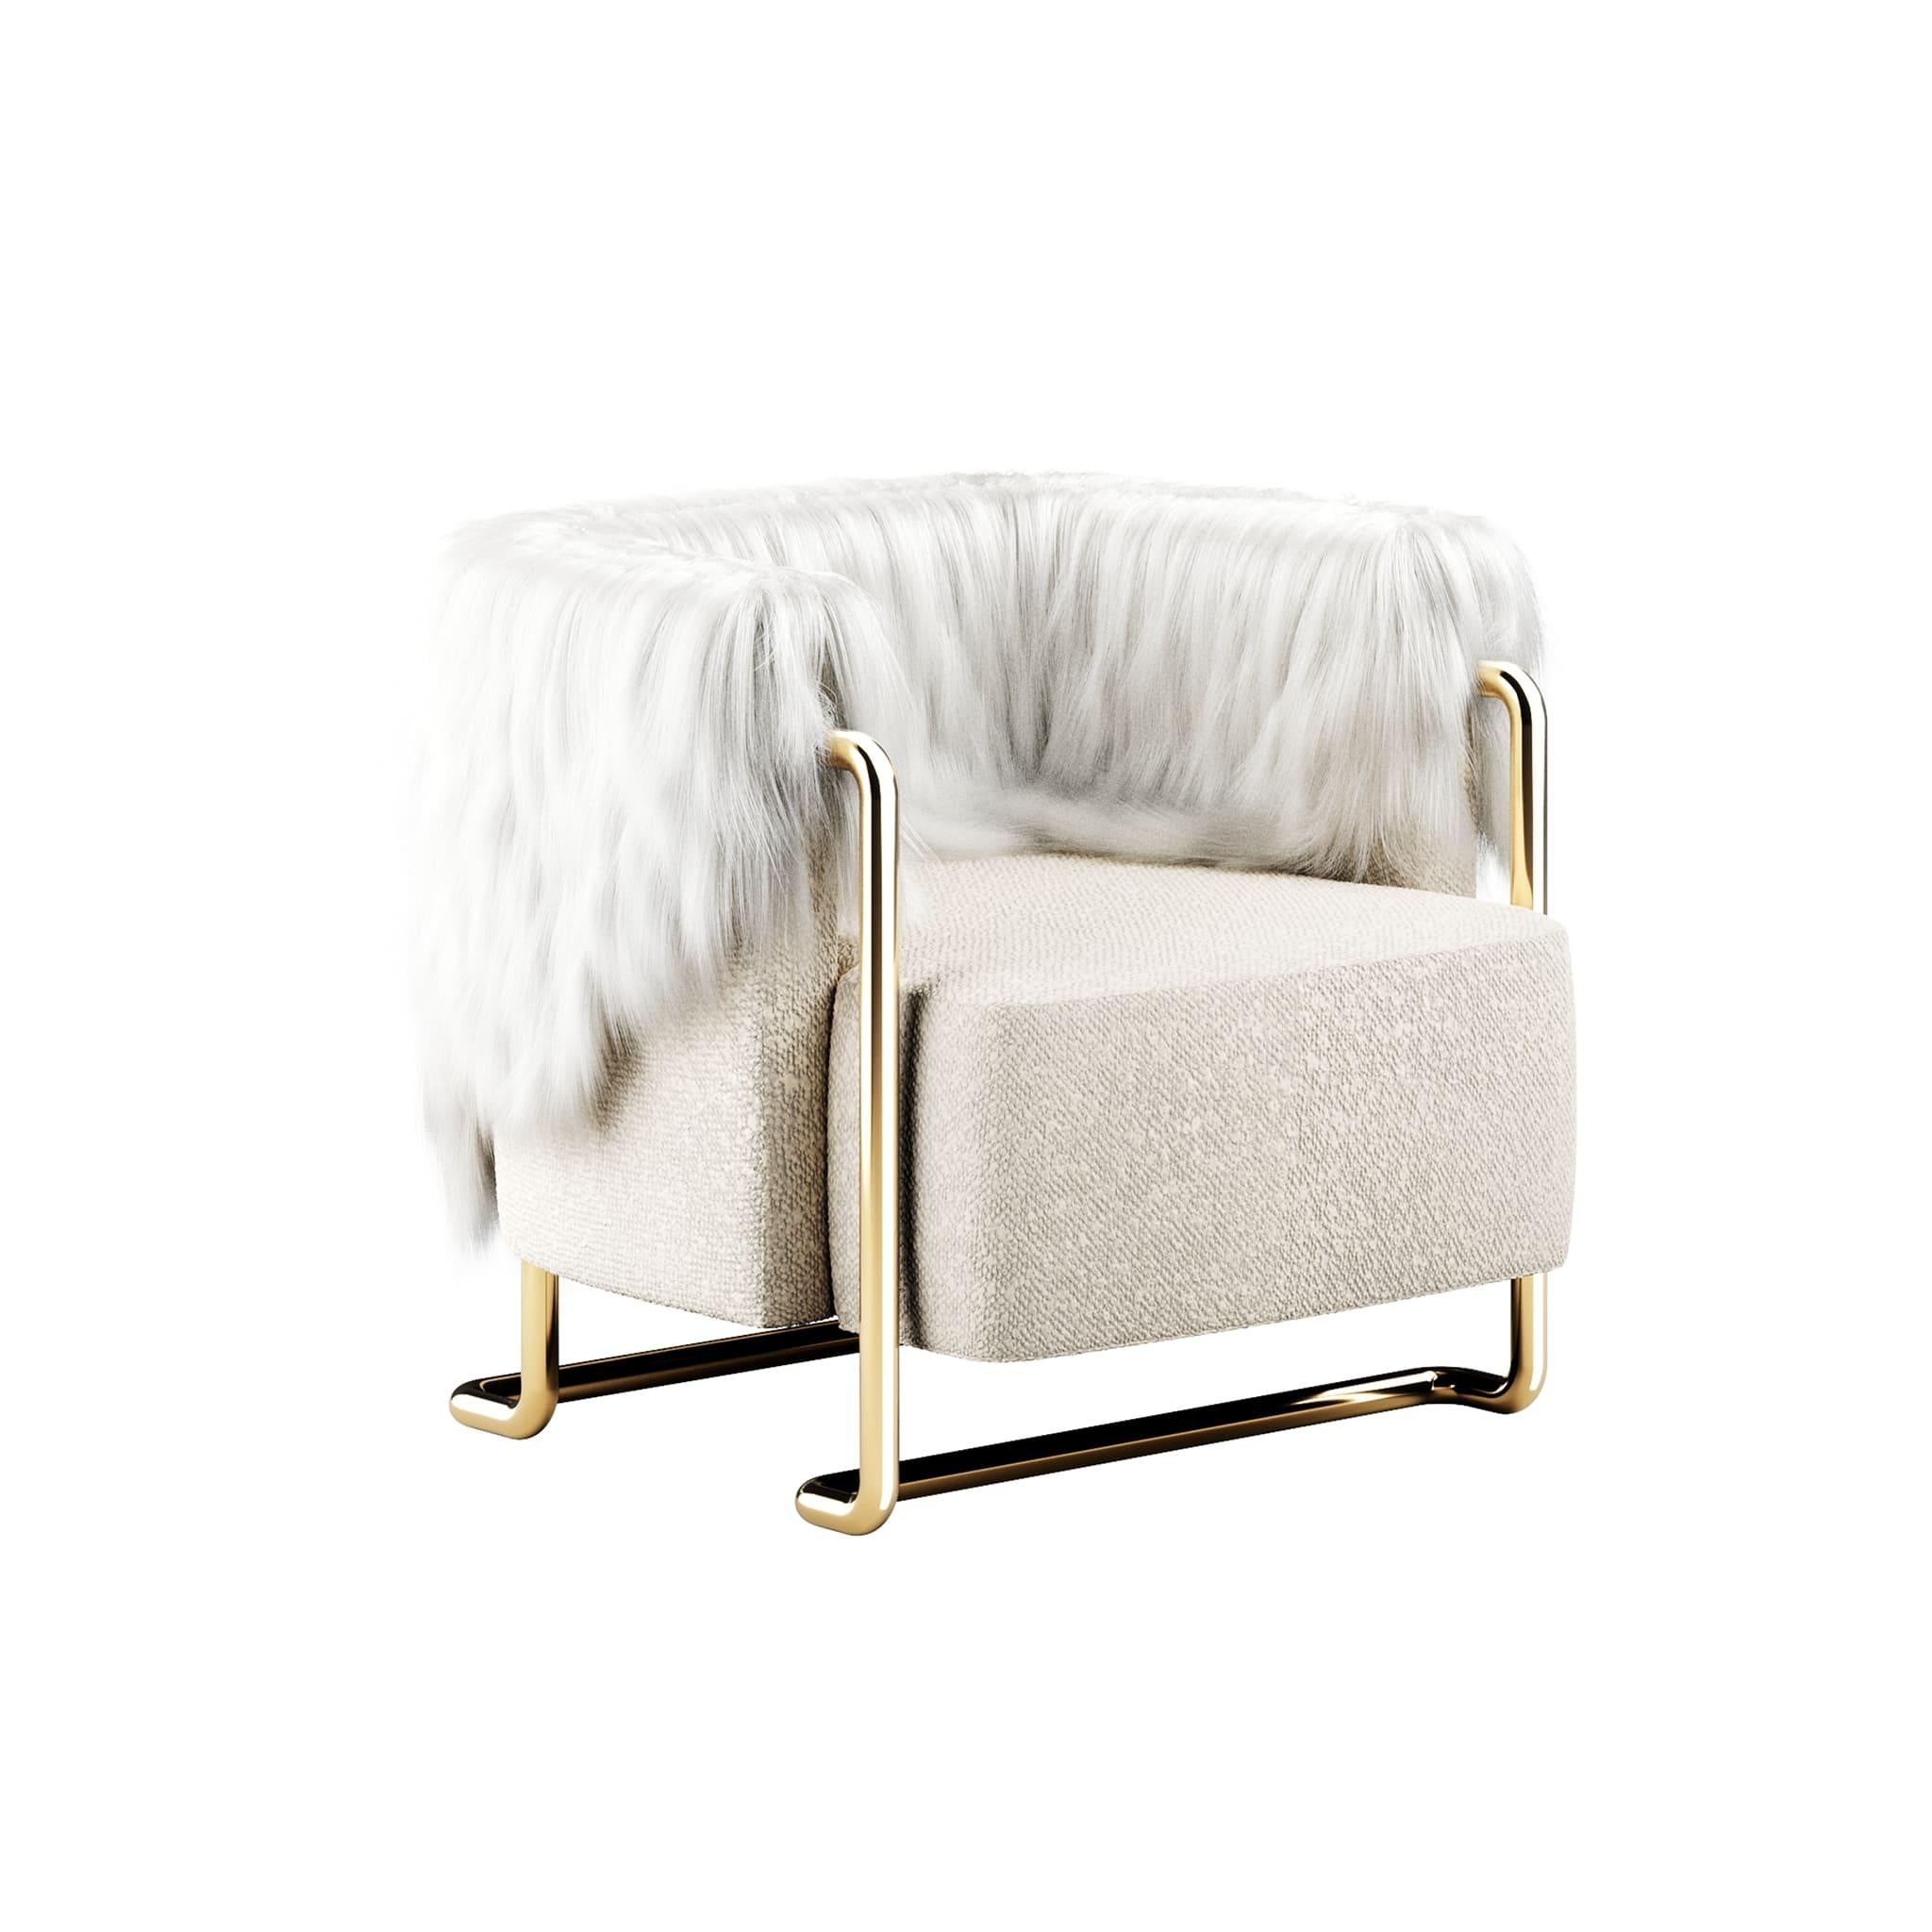 21th Century Modern Cream bouclé armchair back in fur, polished brass legs.

Max Armchair Cream is a modern mid-century style armchair. This modern armchair brings details from the old days to contemporary design. The armchair design shape and